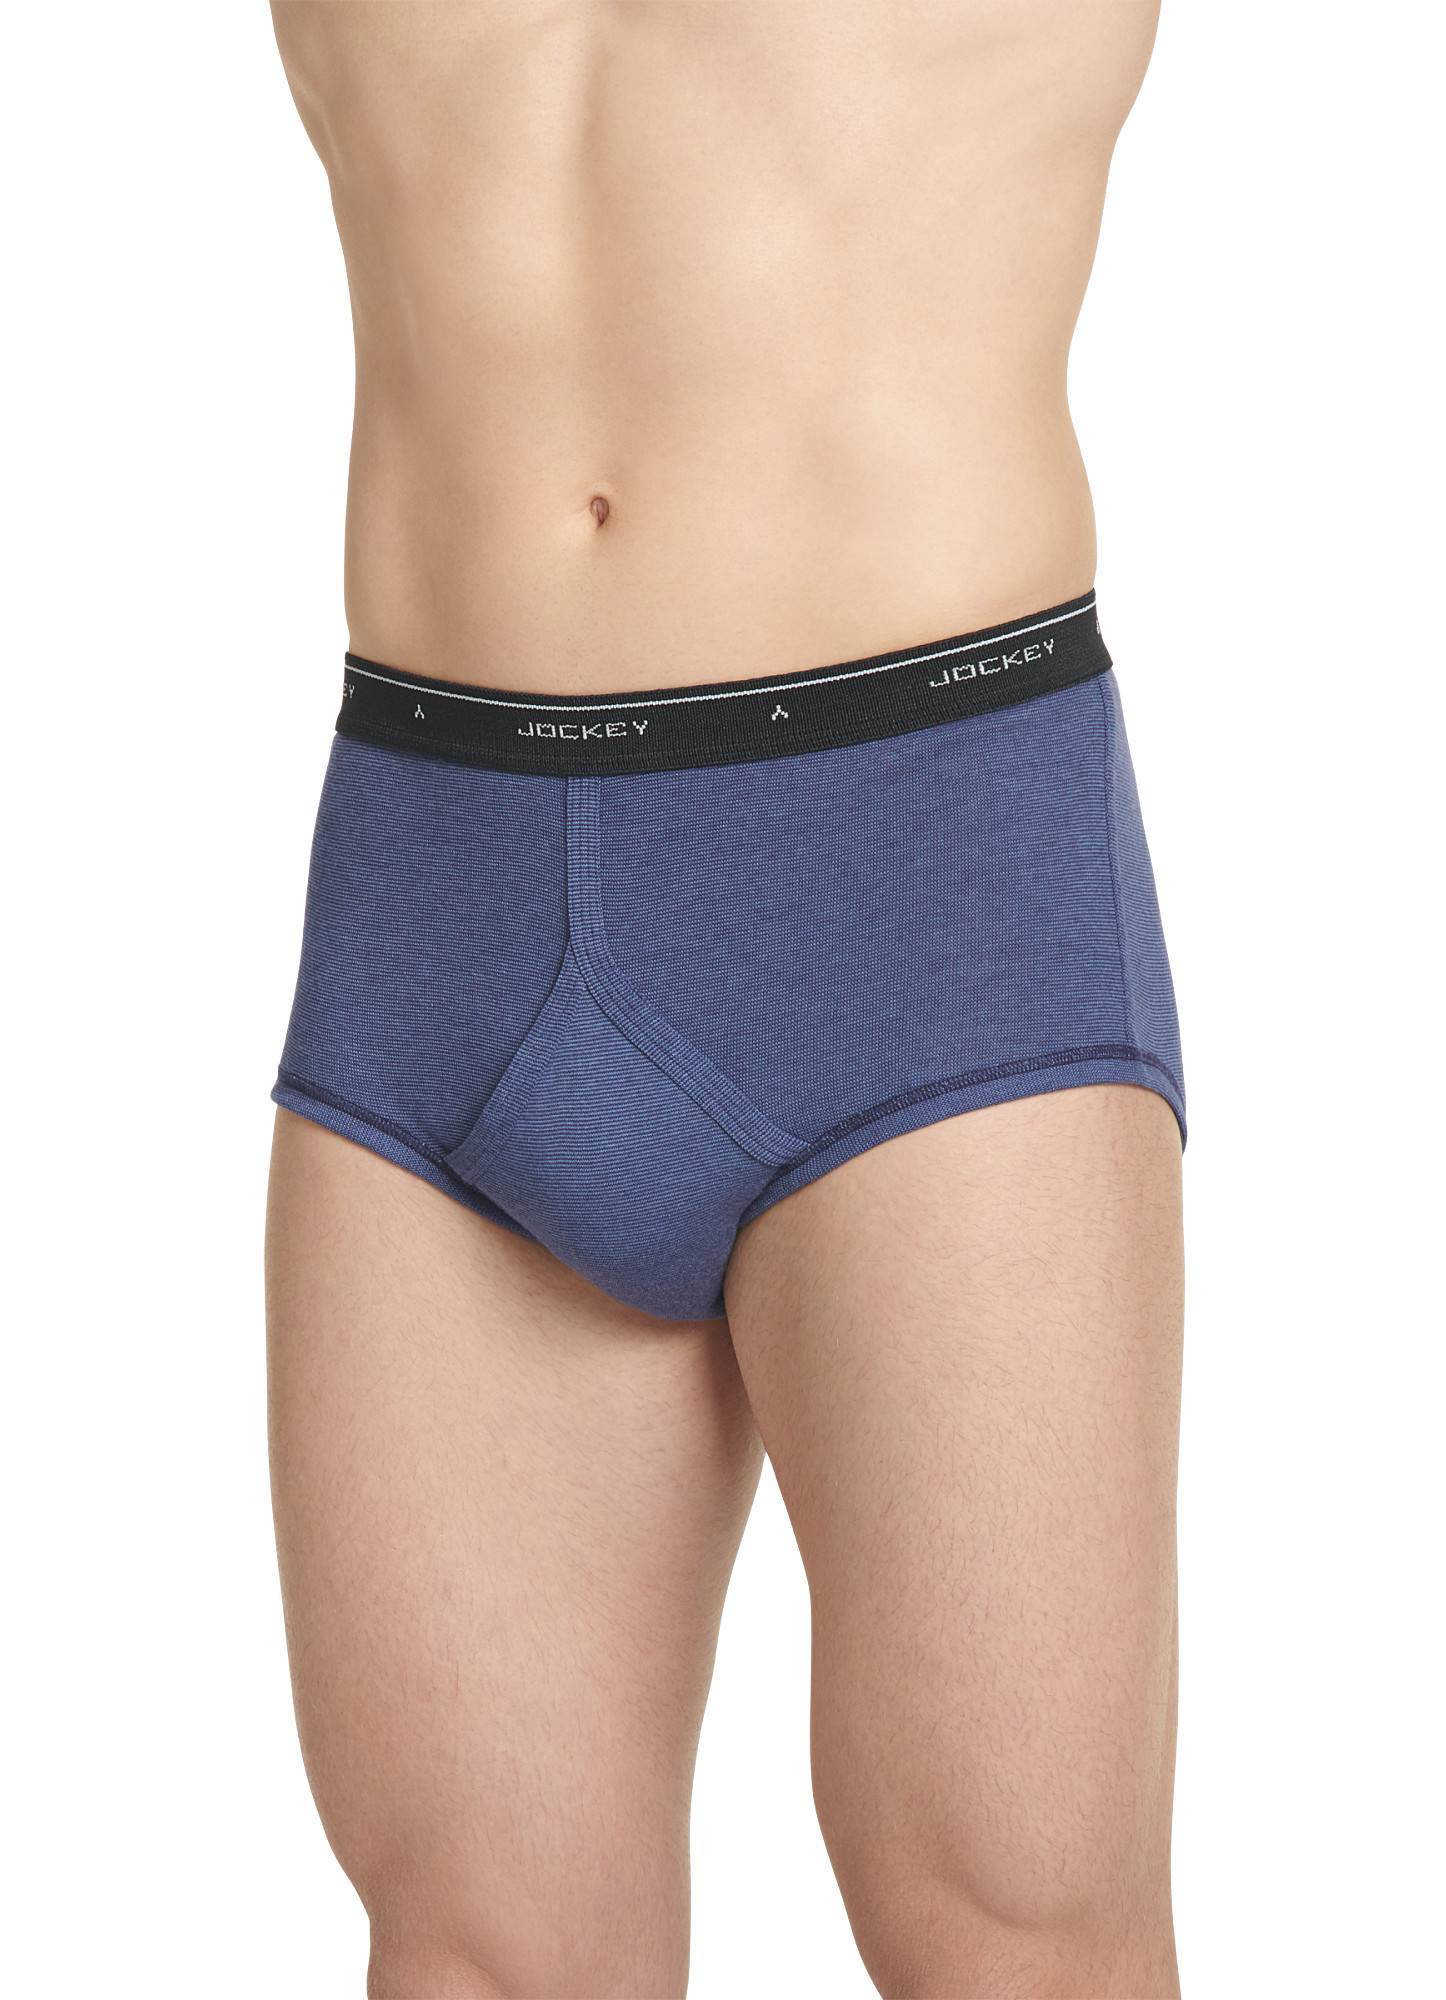 Jockey® Full Rise Boxer Brief with multiple colors available - 9977